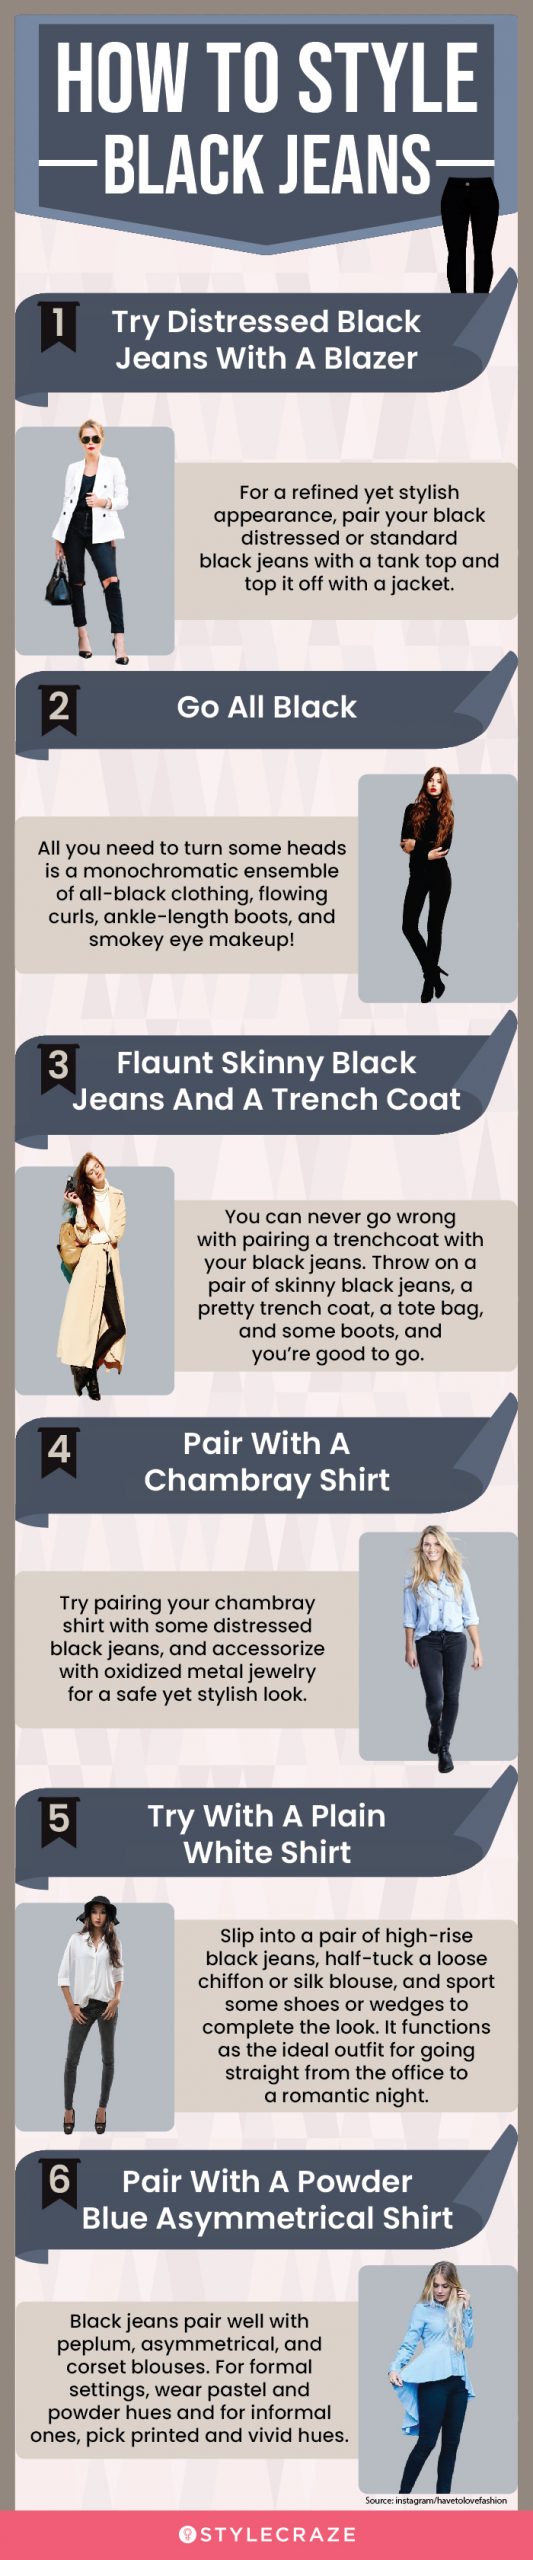 how to style black jeans [infographic]